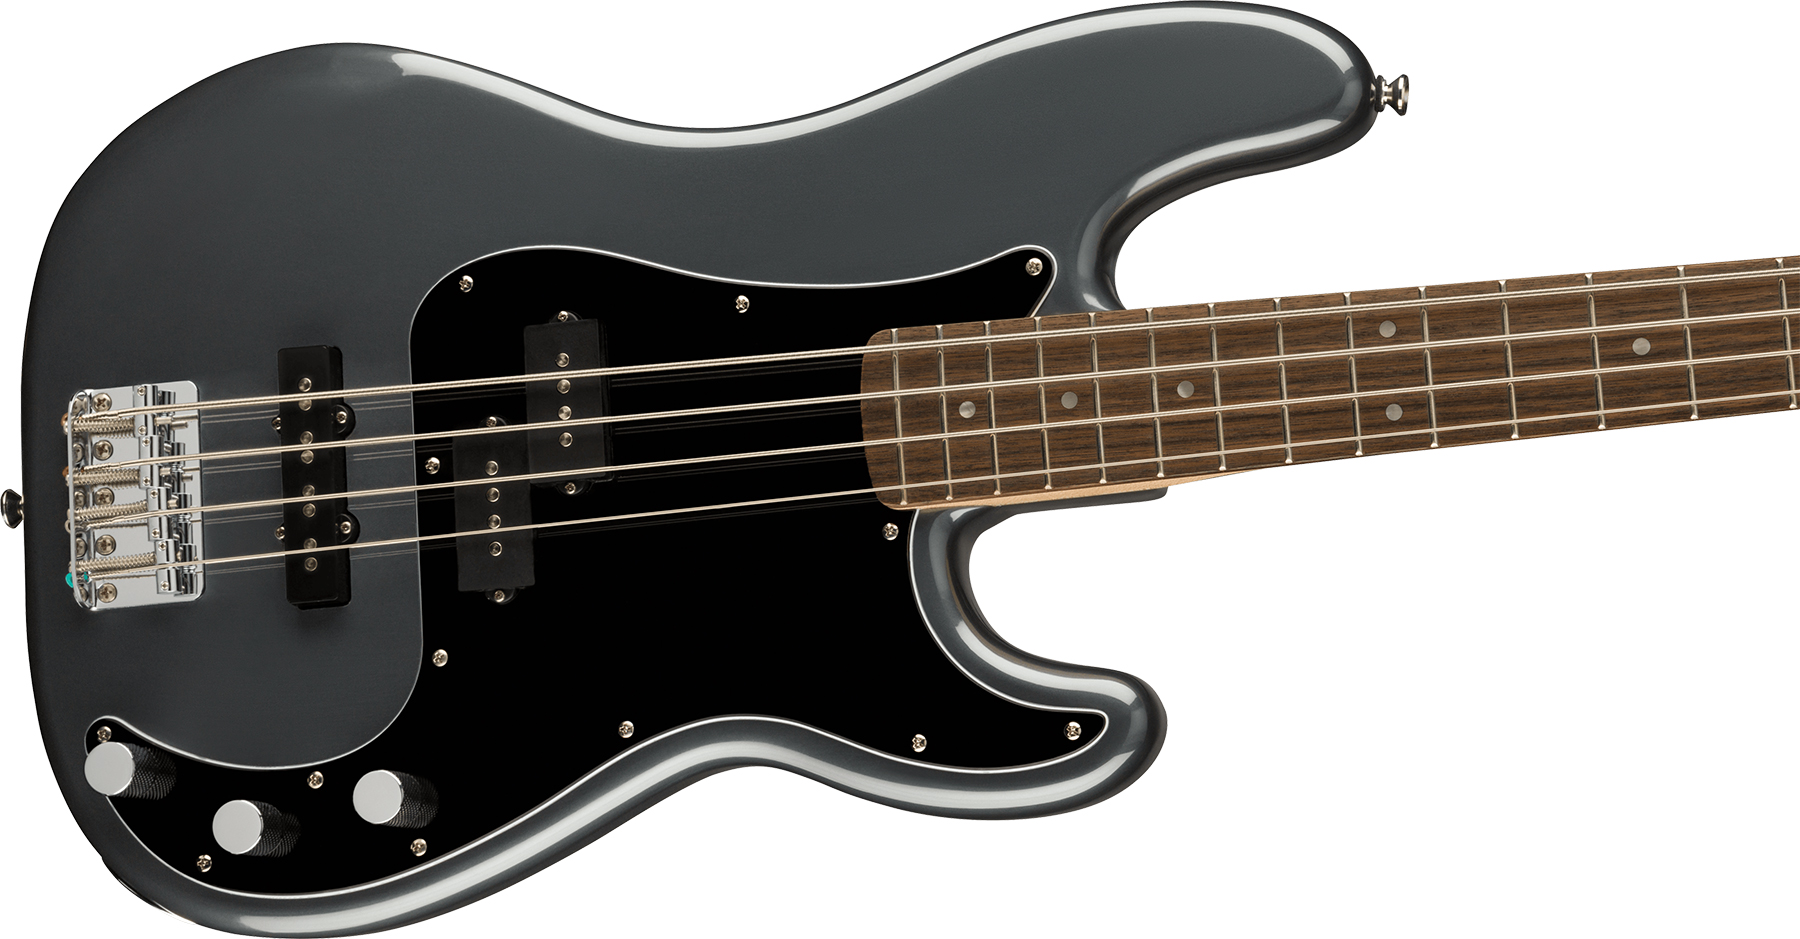 Squier Precision Bass Affinity Pj 2021 Lau - Charcoal Frost Metallic - Solidbody E-bass - Variation 2